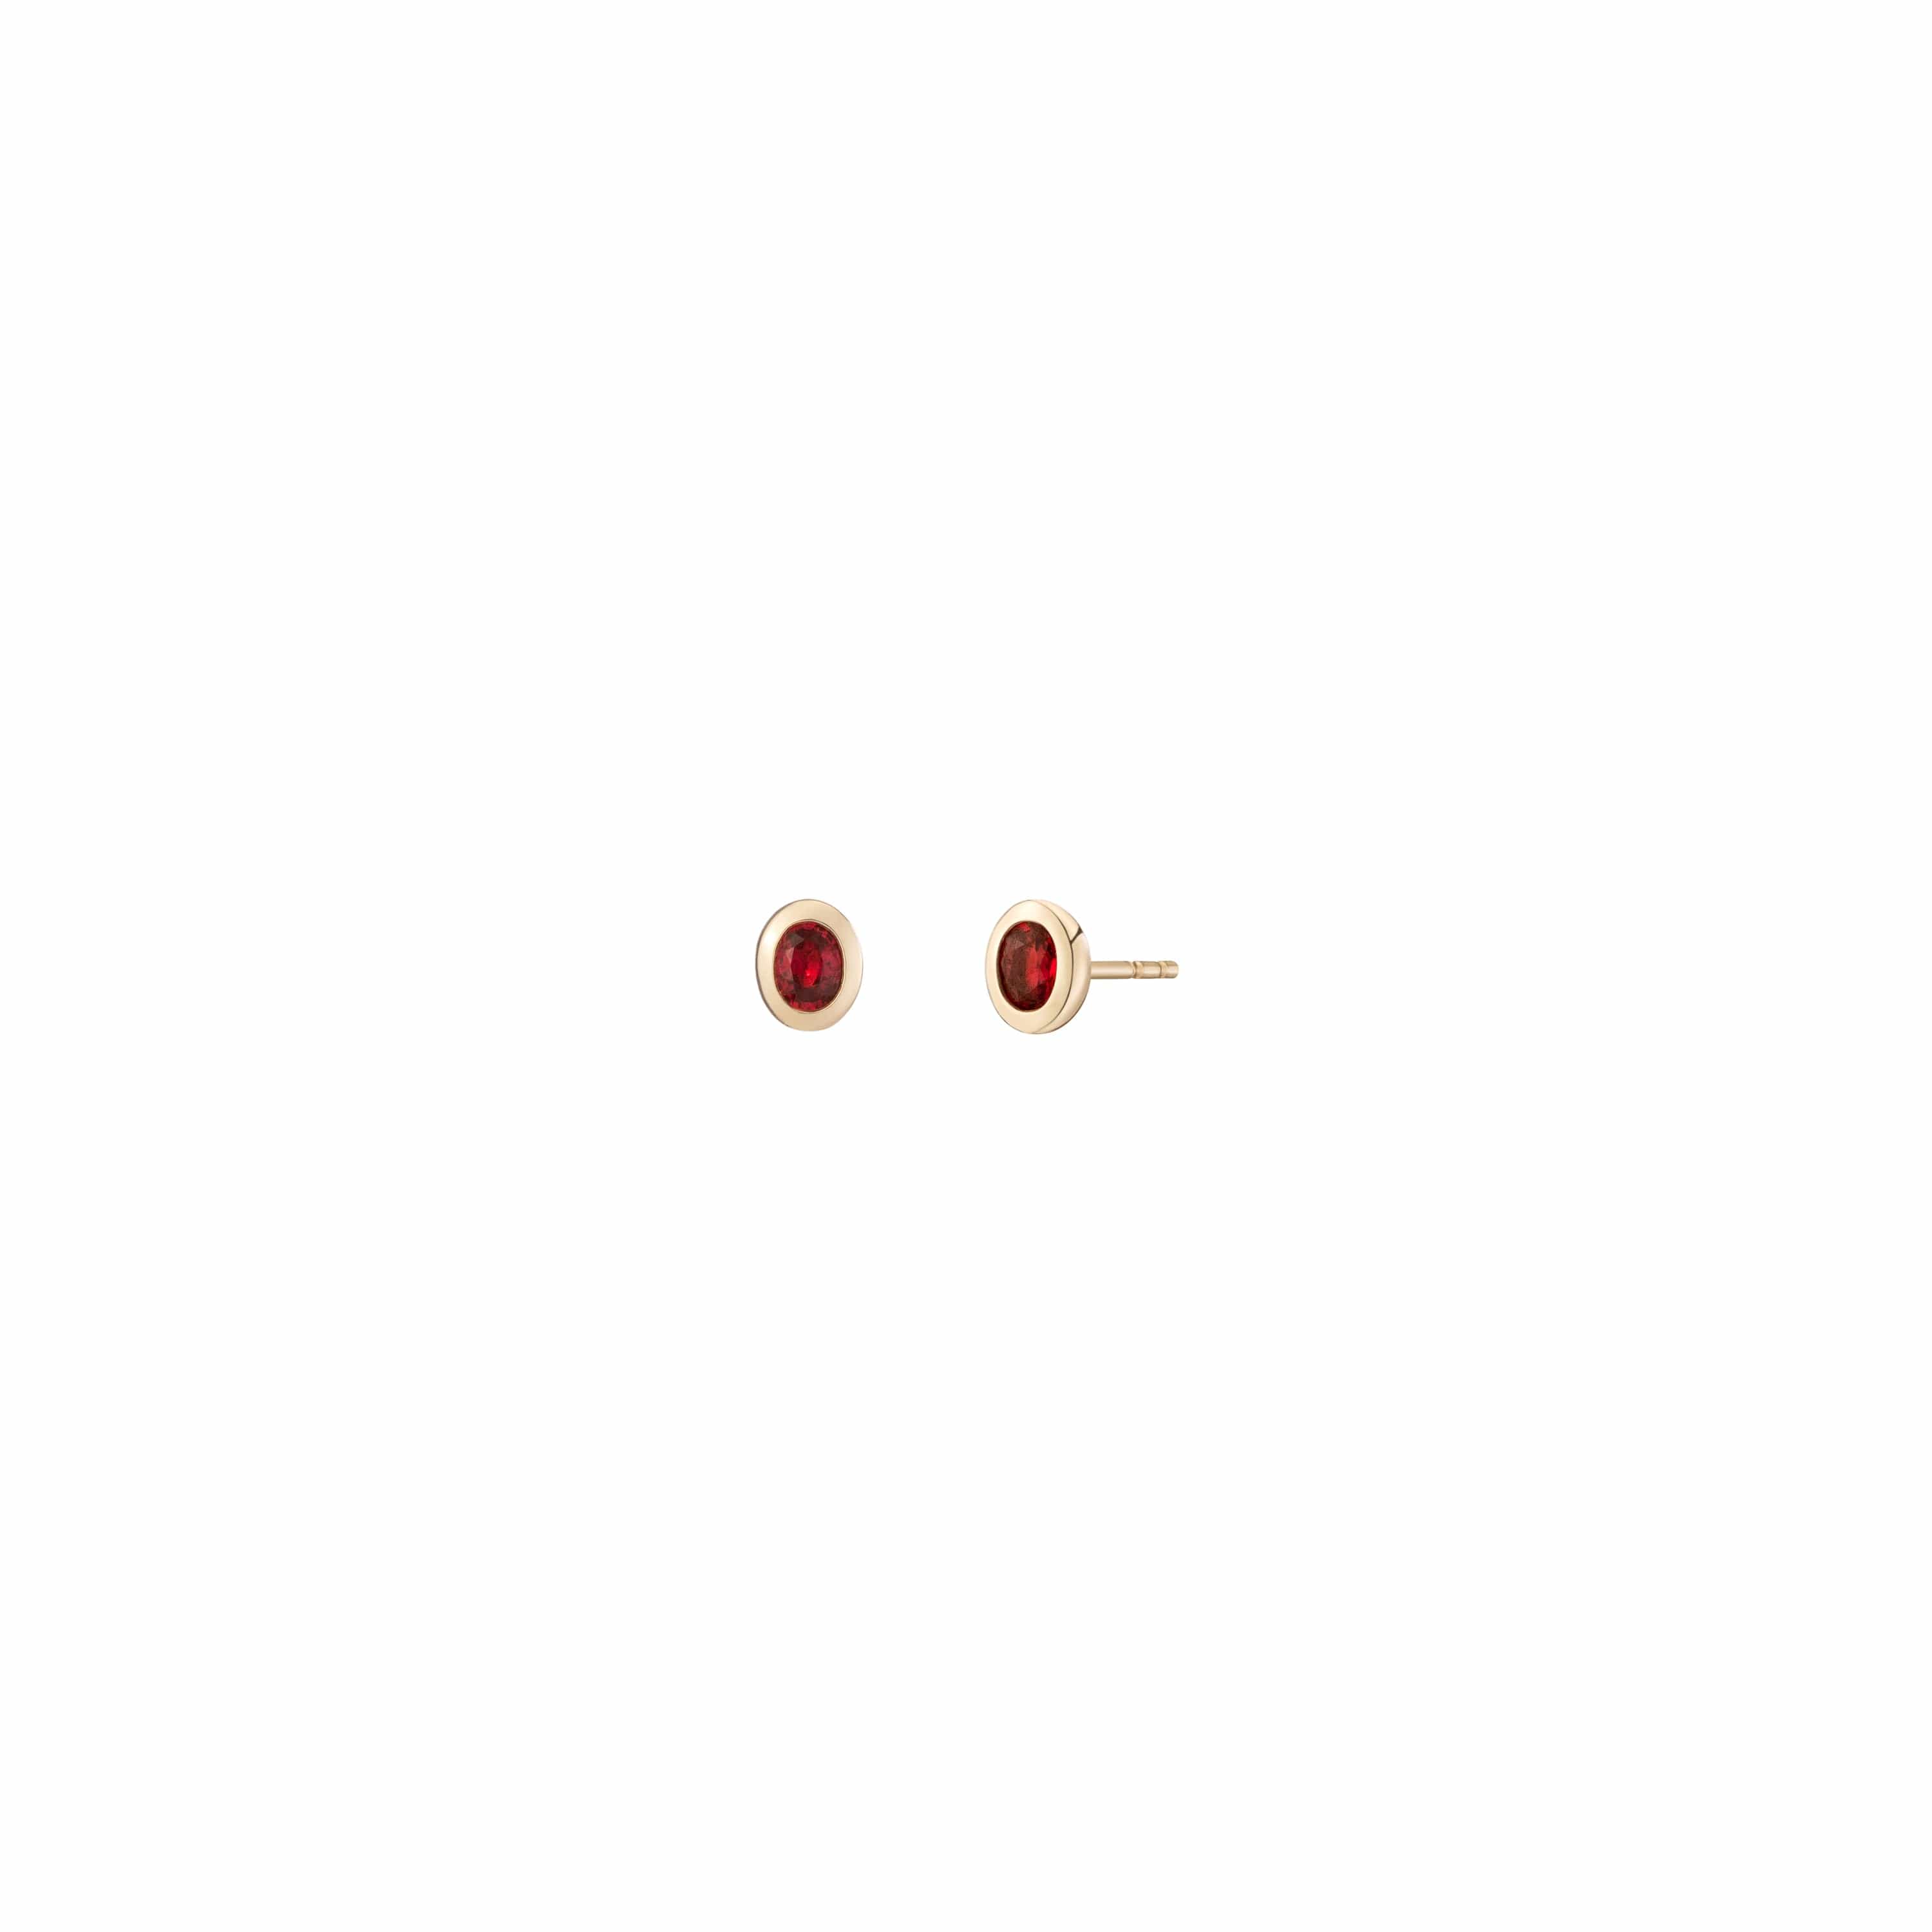 Mined + Found Earrings confetti studs, red sapphire